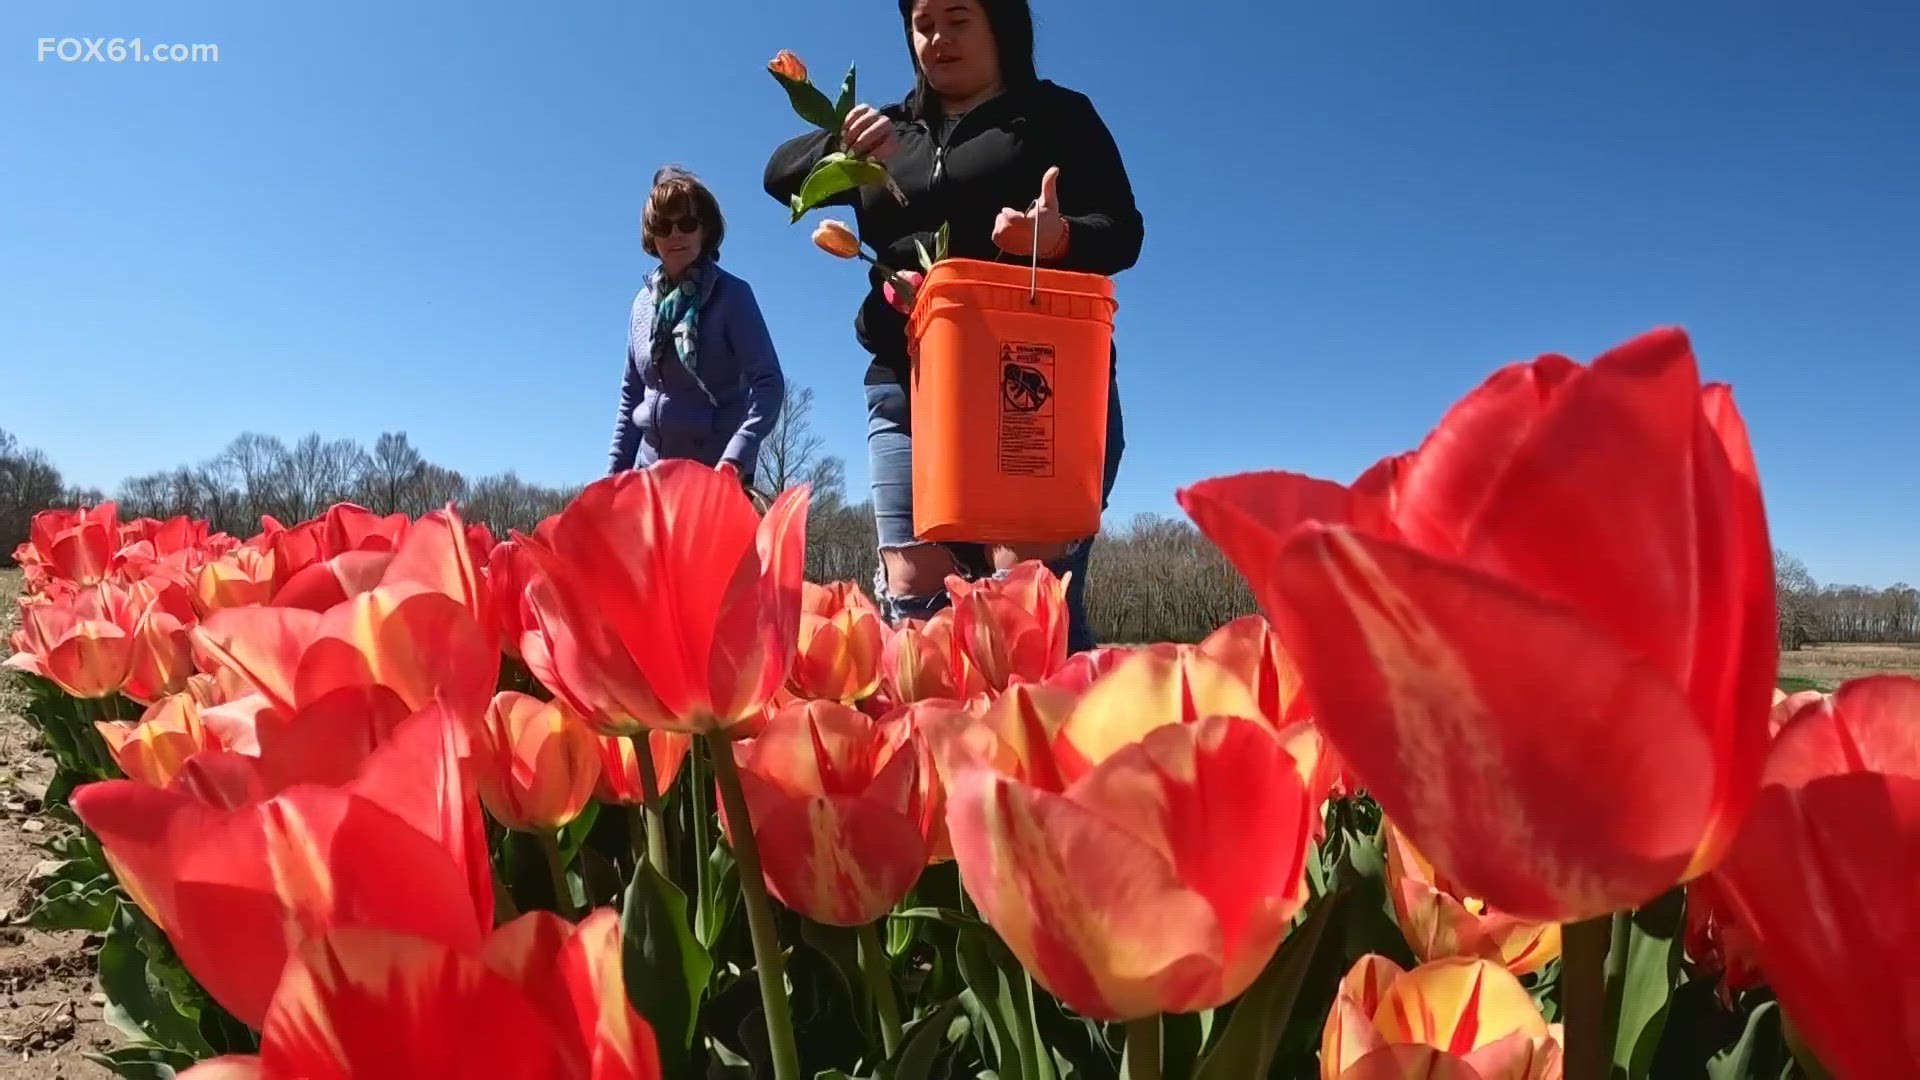 Wicked Tulips for its fourth season in Preston, and, this year, they are boasting more than 750,000 tulips spread across six acres of the farm.